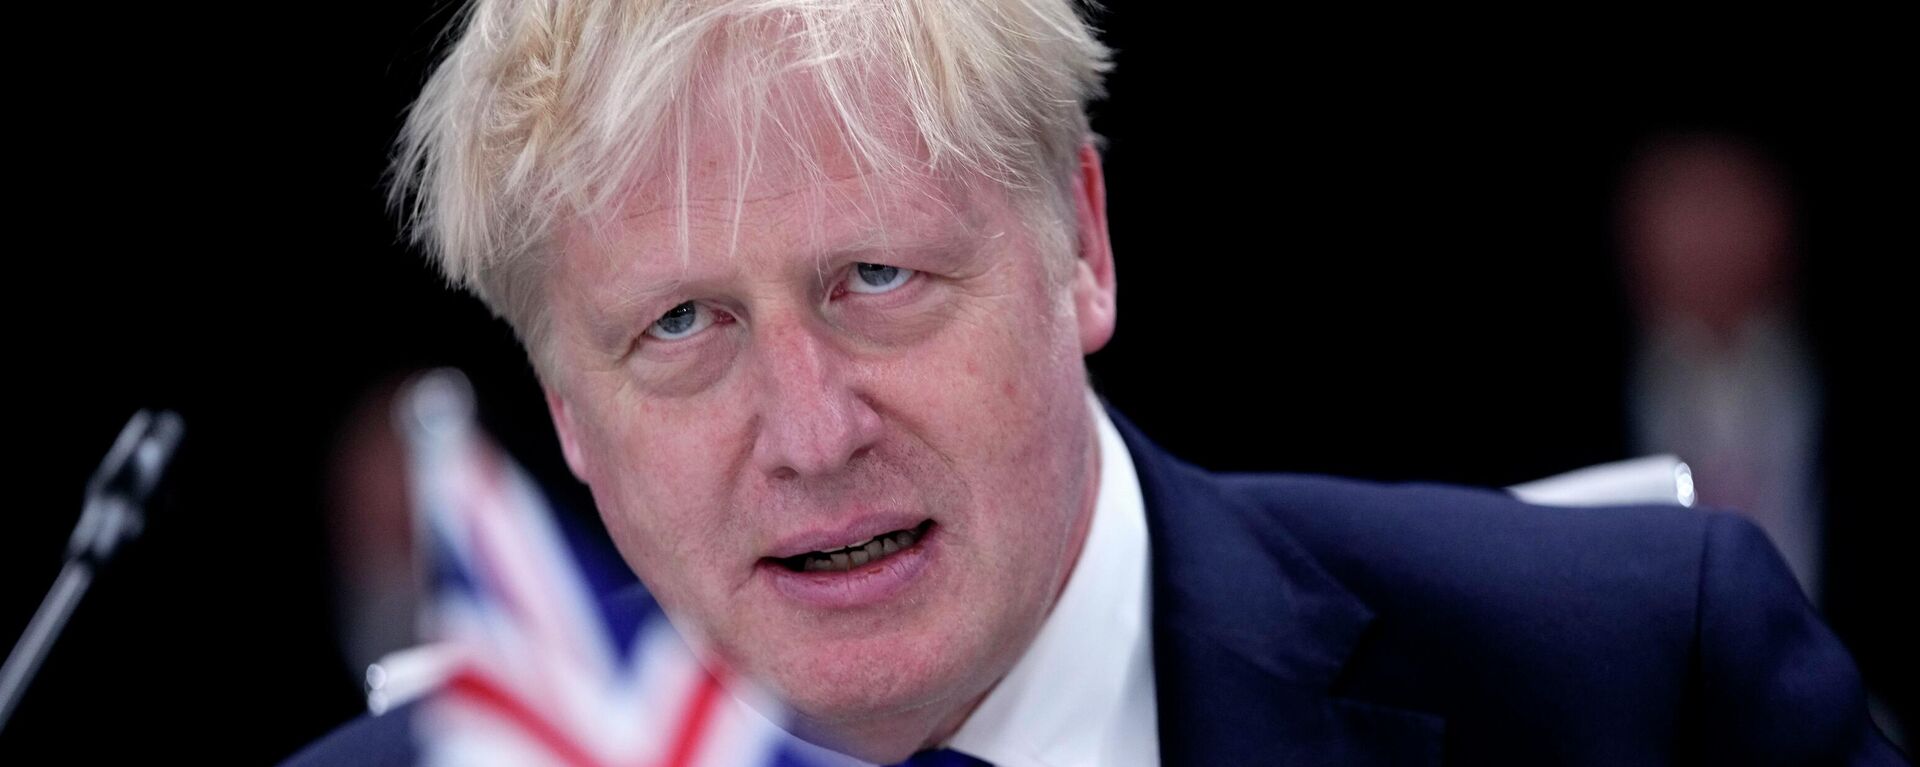 British Prime Minister Boris Johnson waits for the start of a round table meeting at a NATO summit in Madrid, Spain on Wednesday, June 29, 2022 - Sputnik International, 1920, 30.06.2022